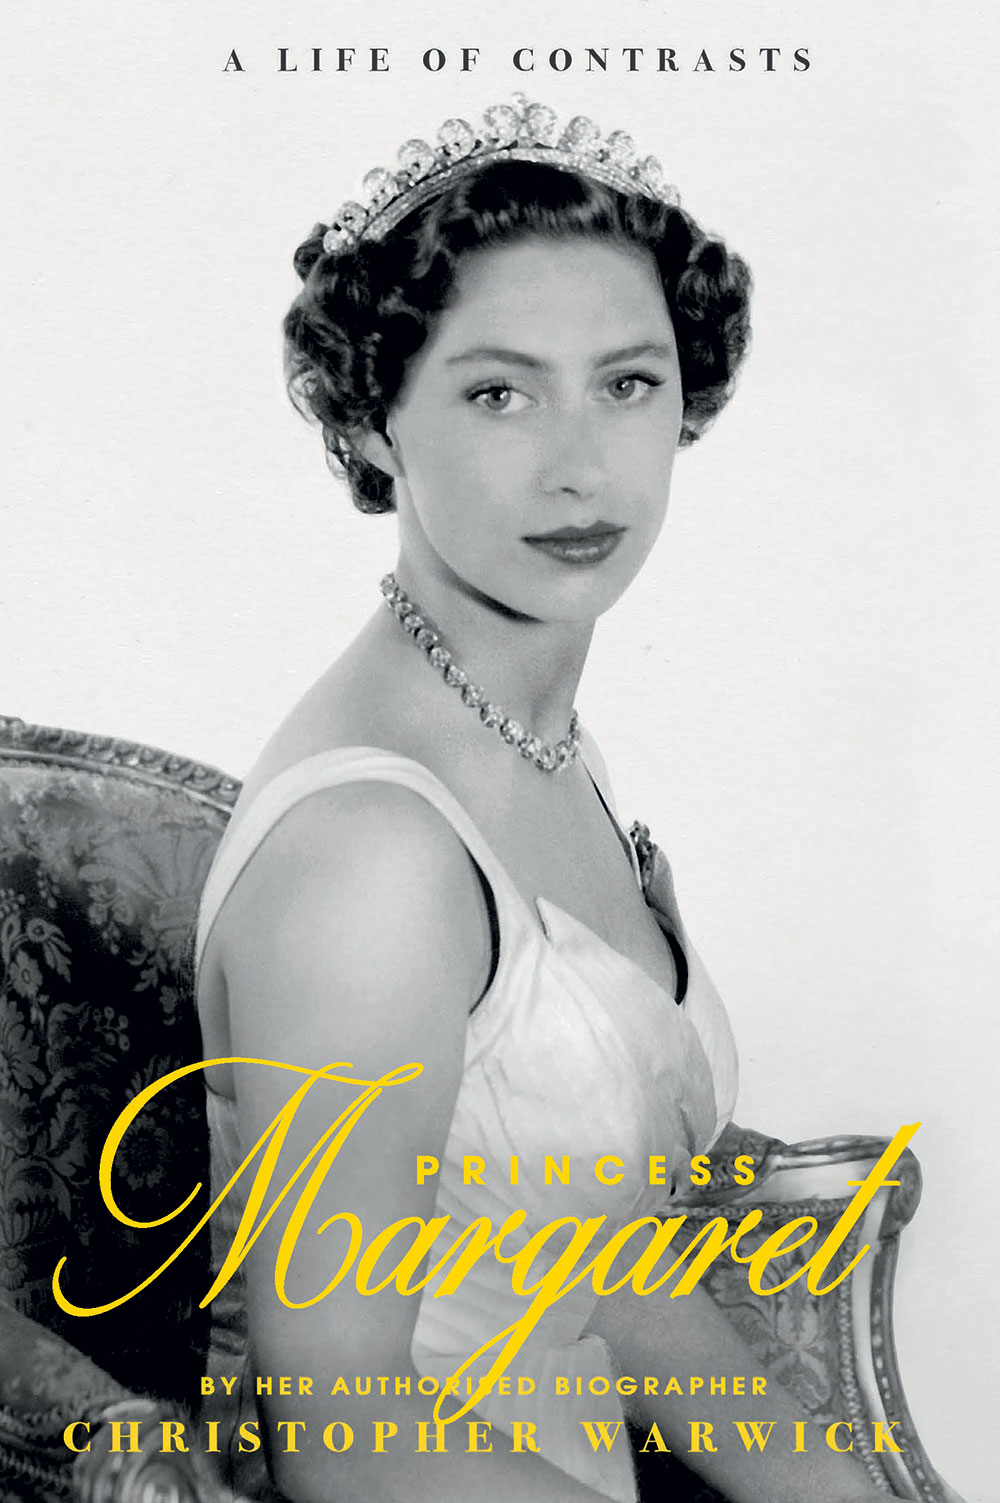 Princess Margaret: A Life of Contrasts by Christopher Warwick